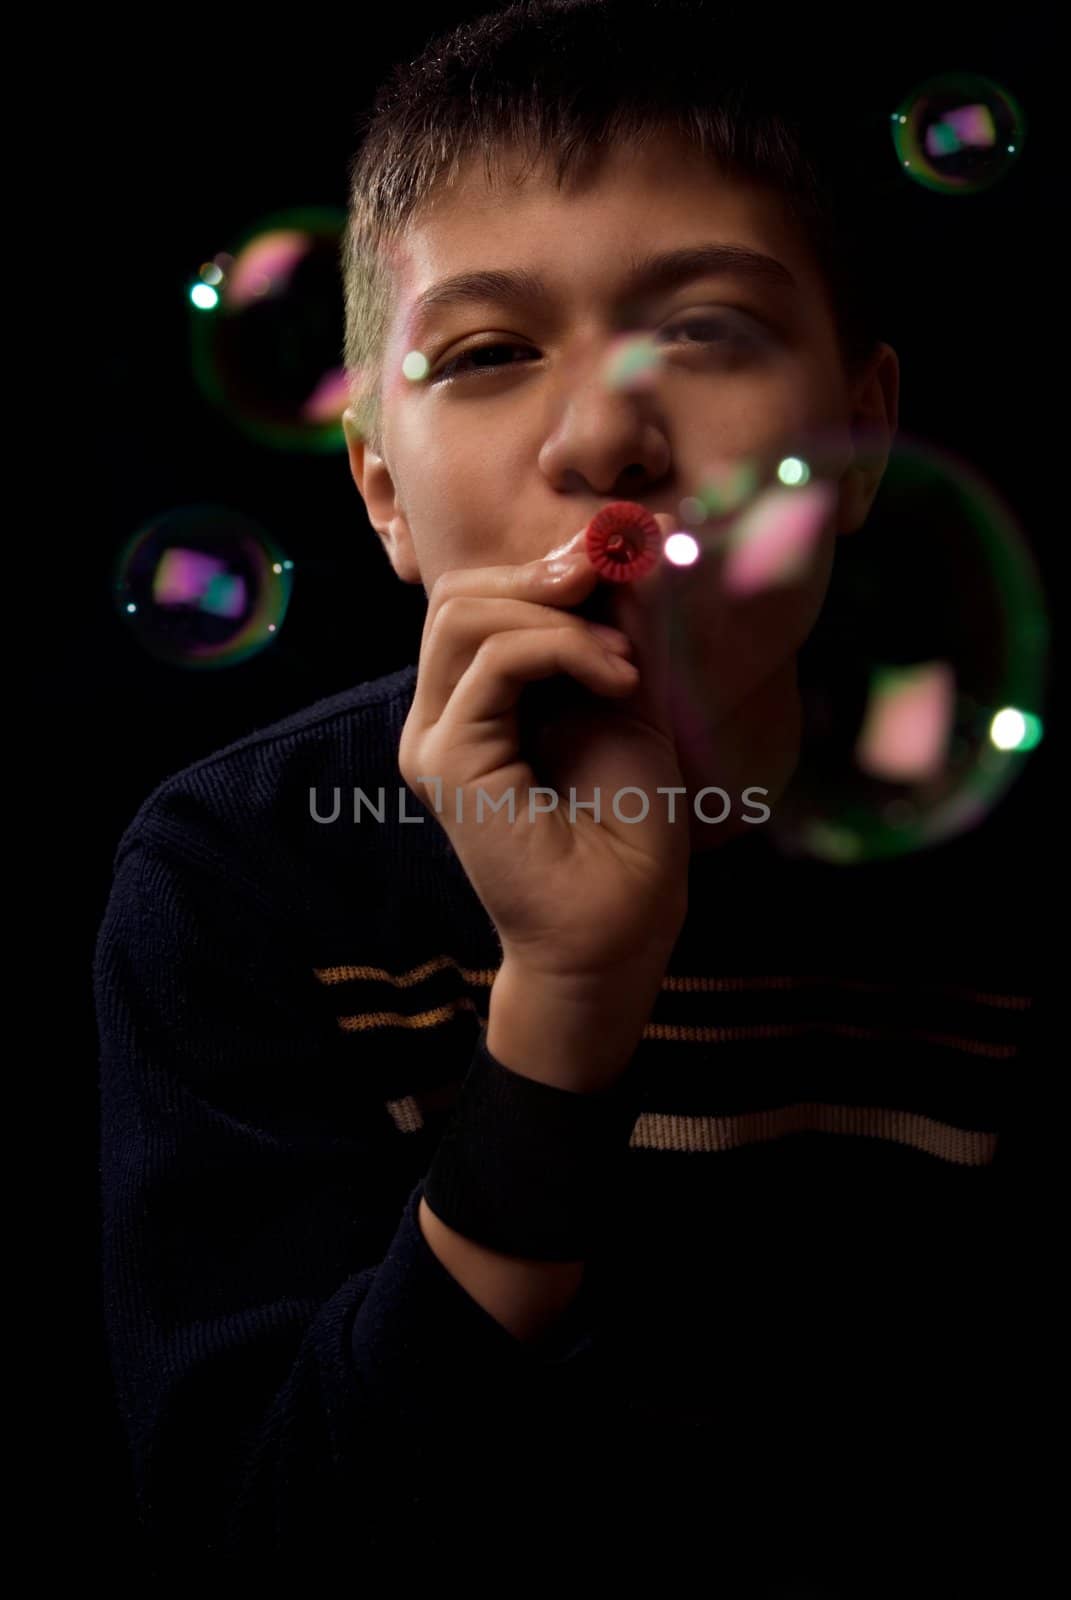 Photo of the young boy blowing soap bubbles